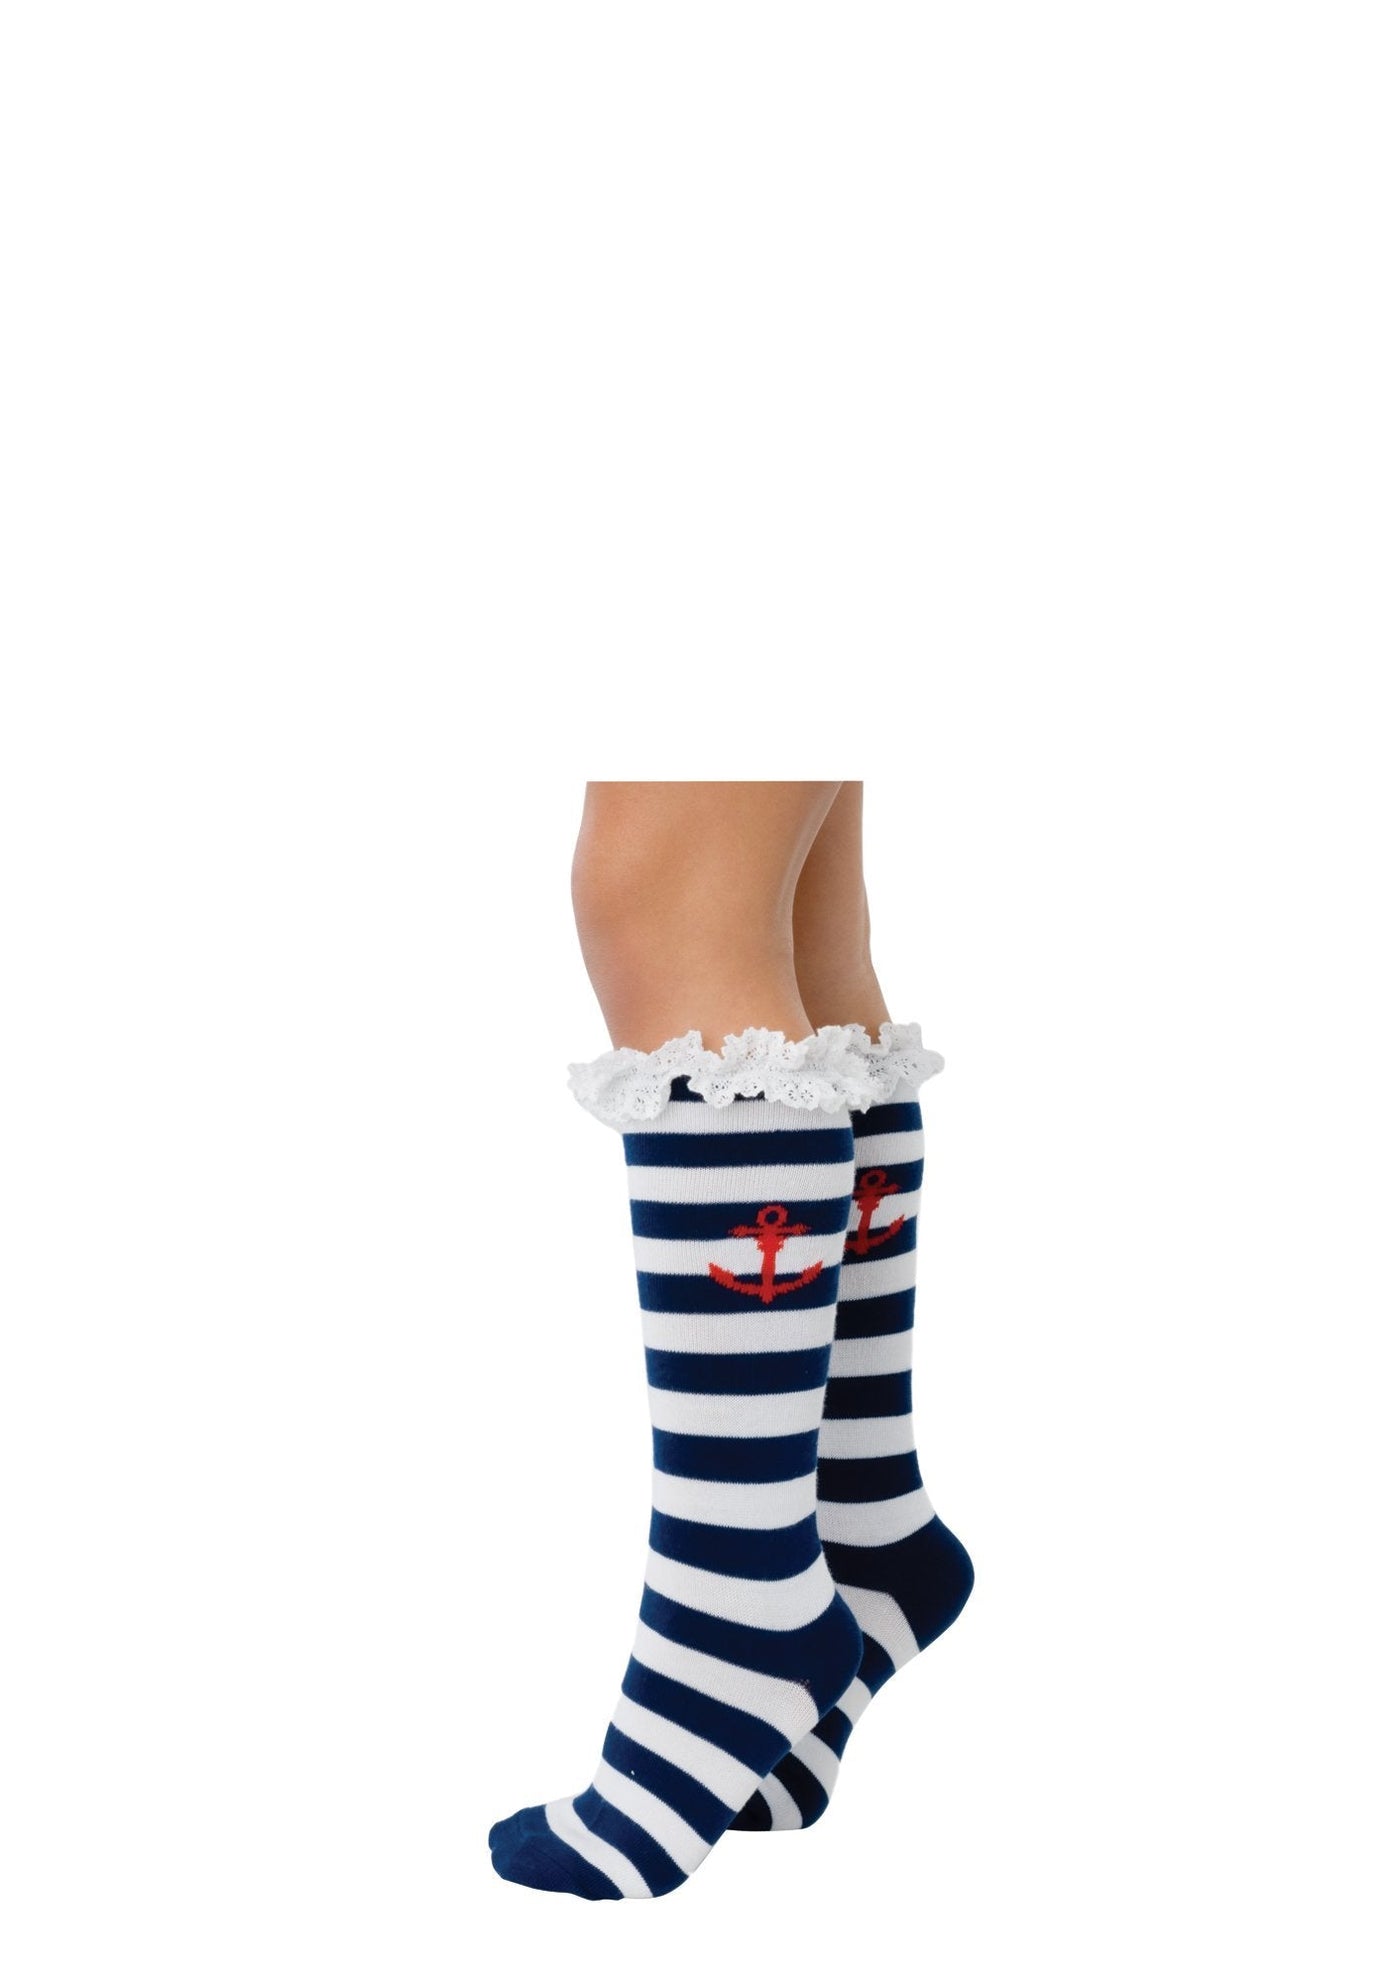 Blue & White Sailor socks with Ruffle Top - JJ's Party House